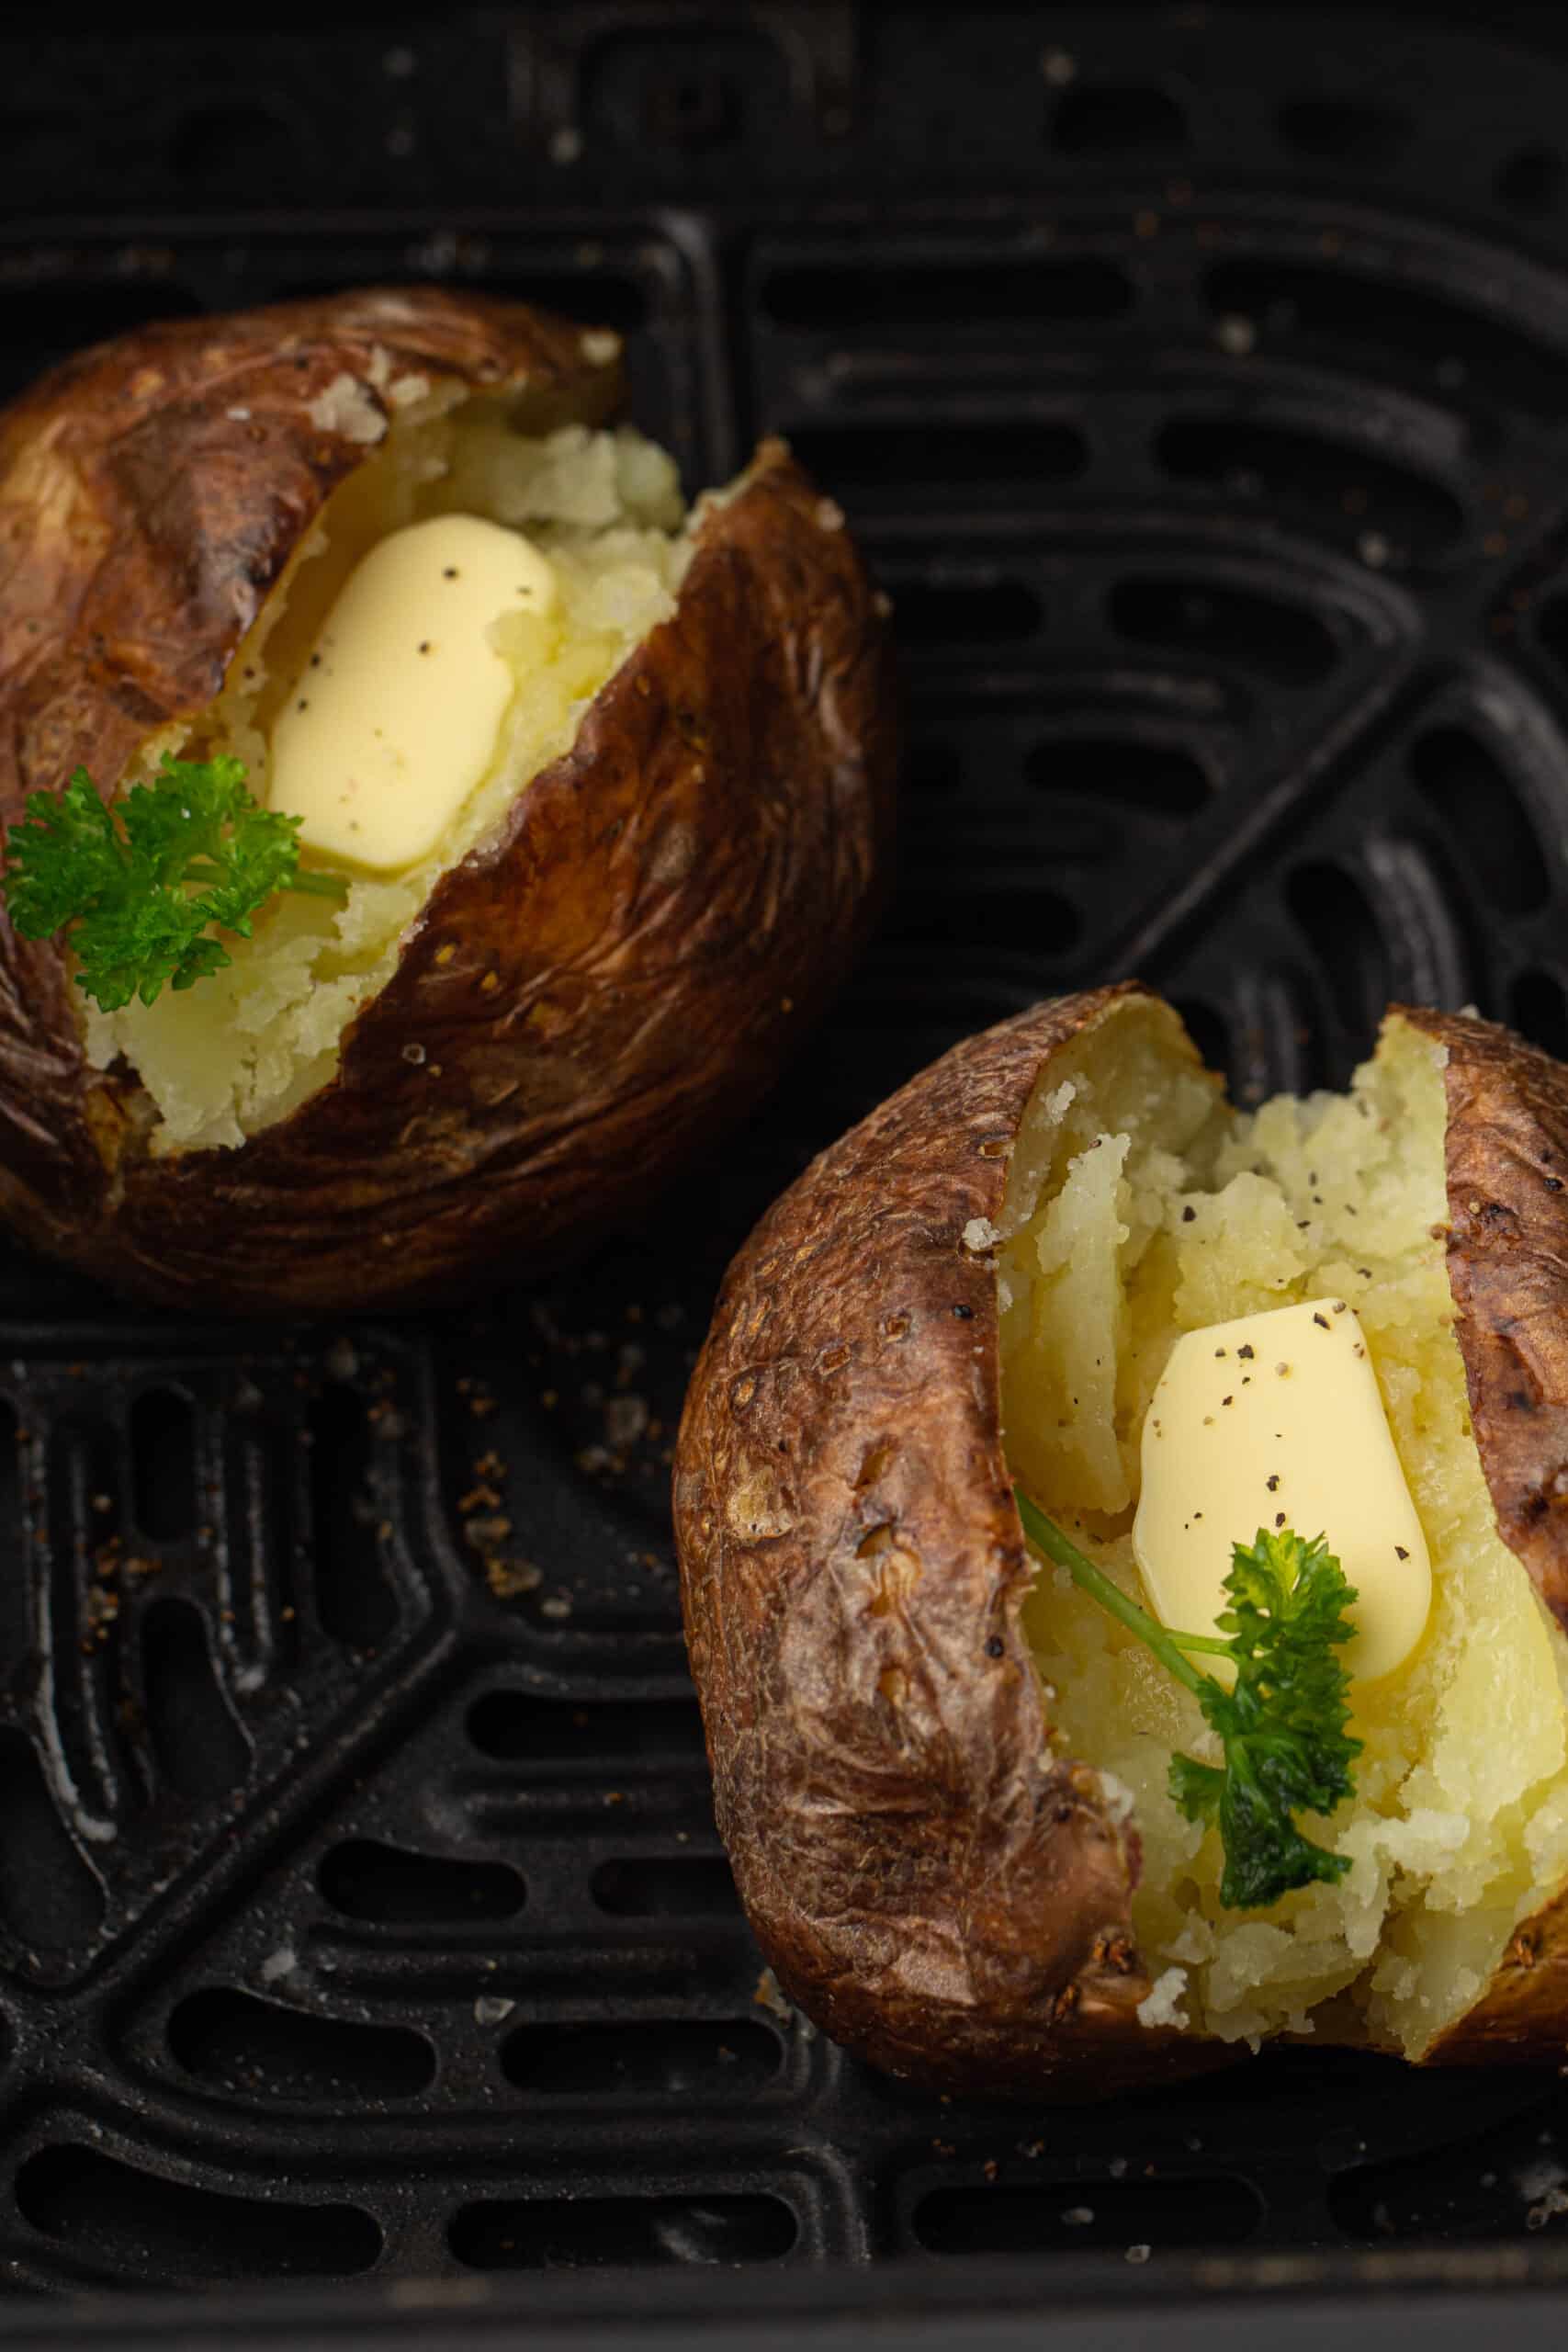 Air Fryer Baked Potato that is ready to eat!